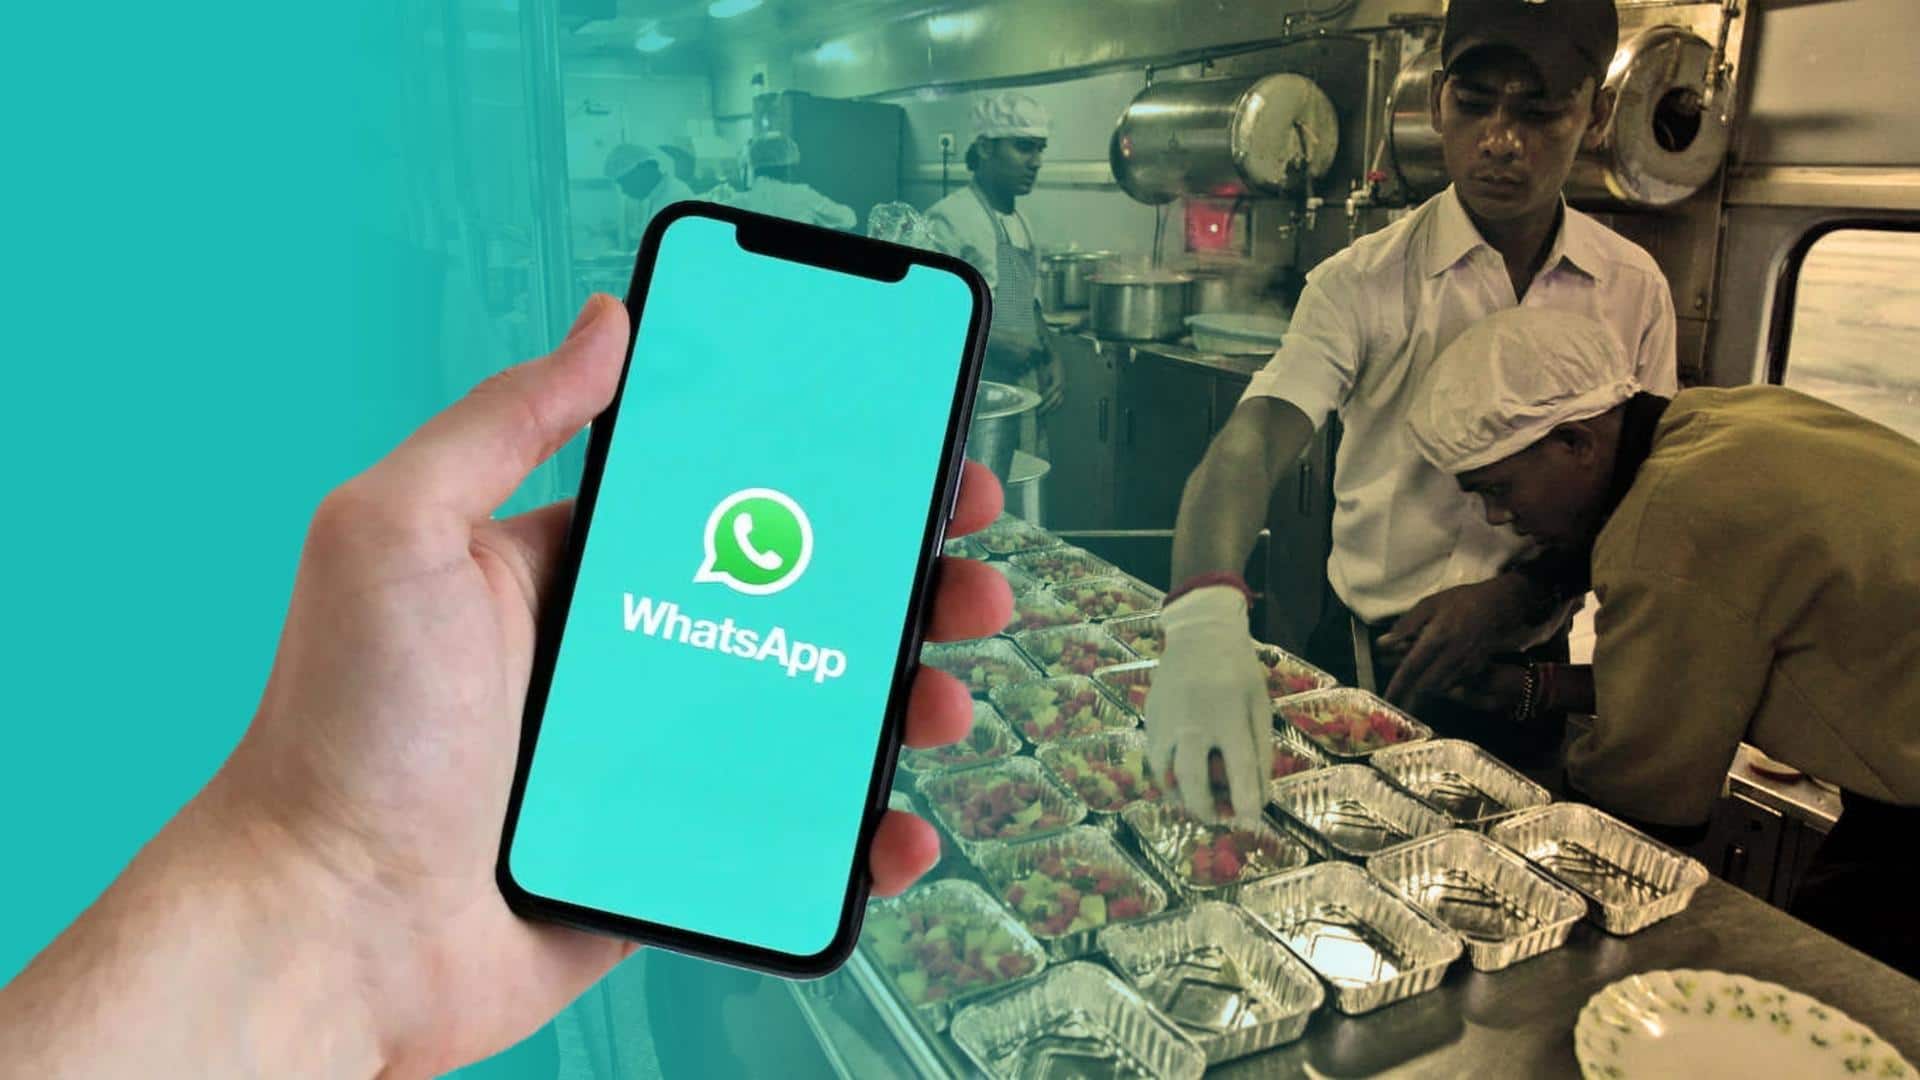 You can now order food on trains through WhatsApp